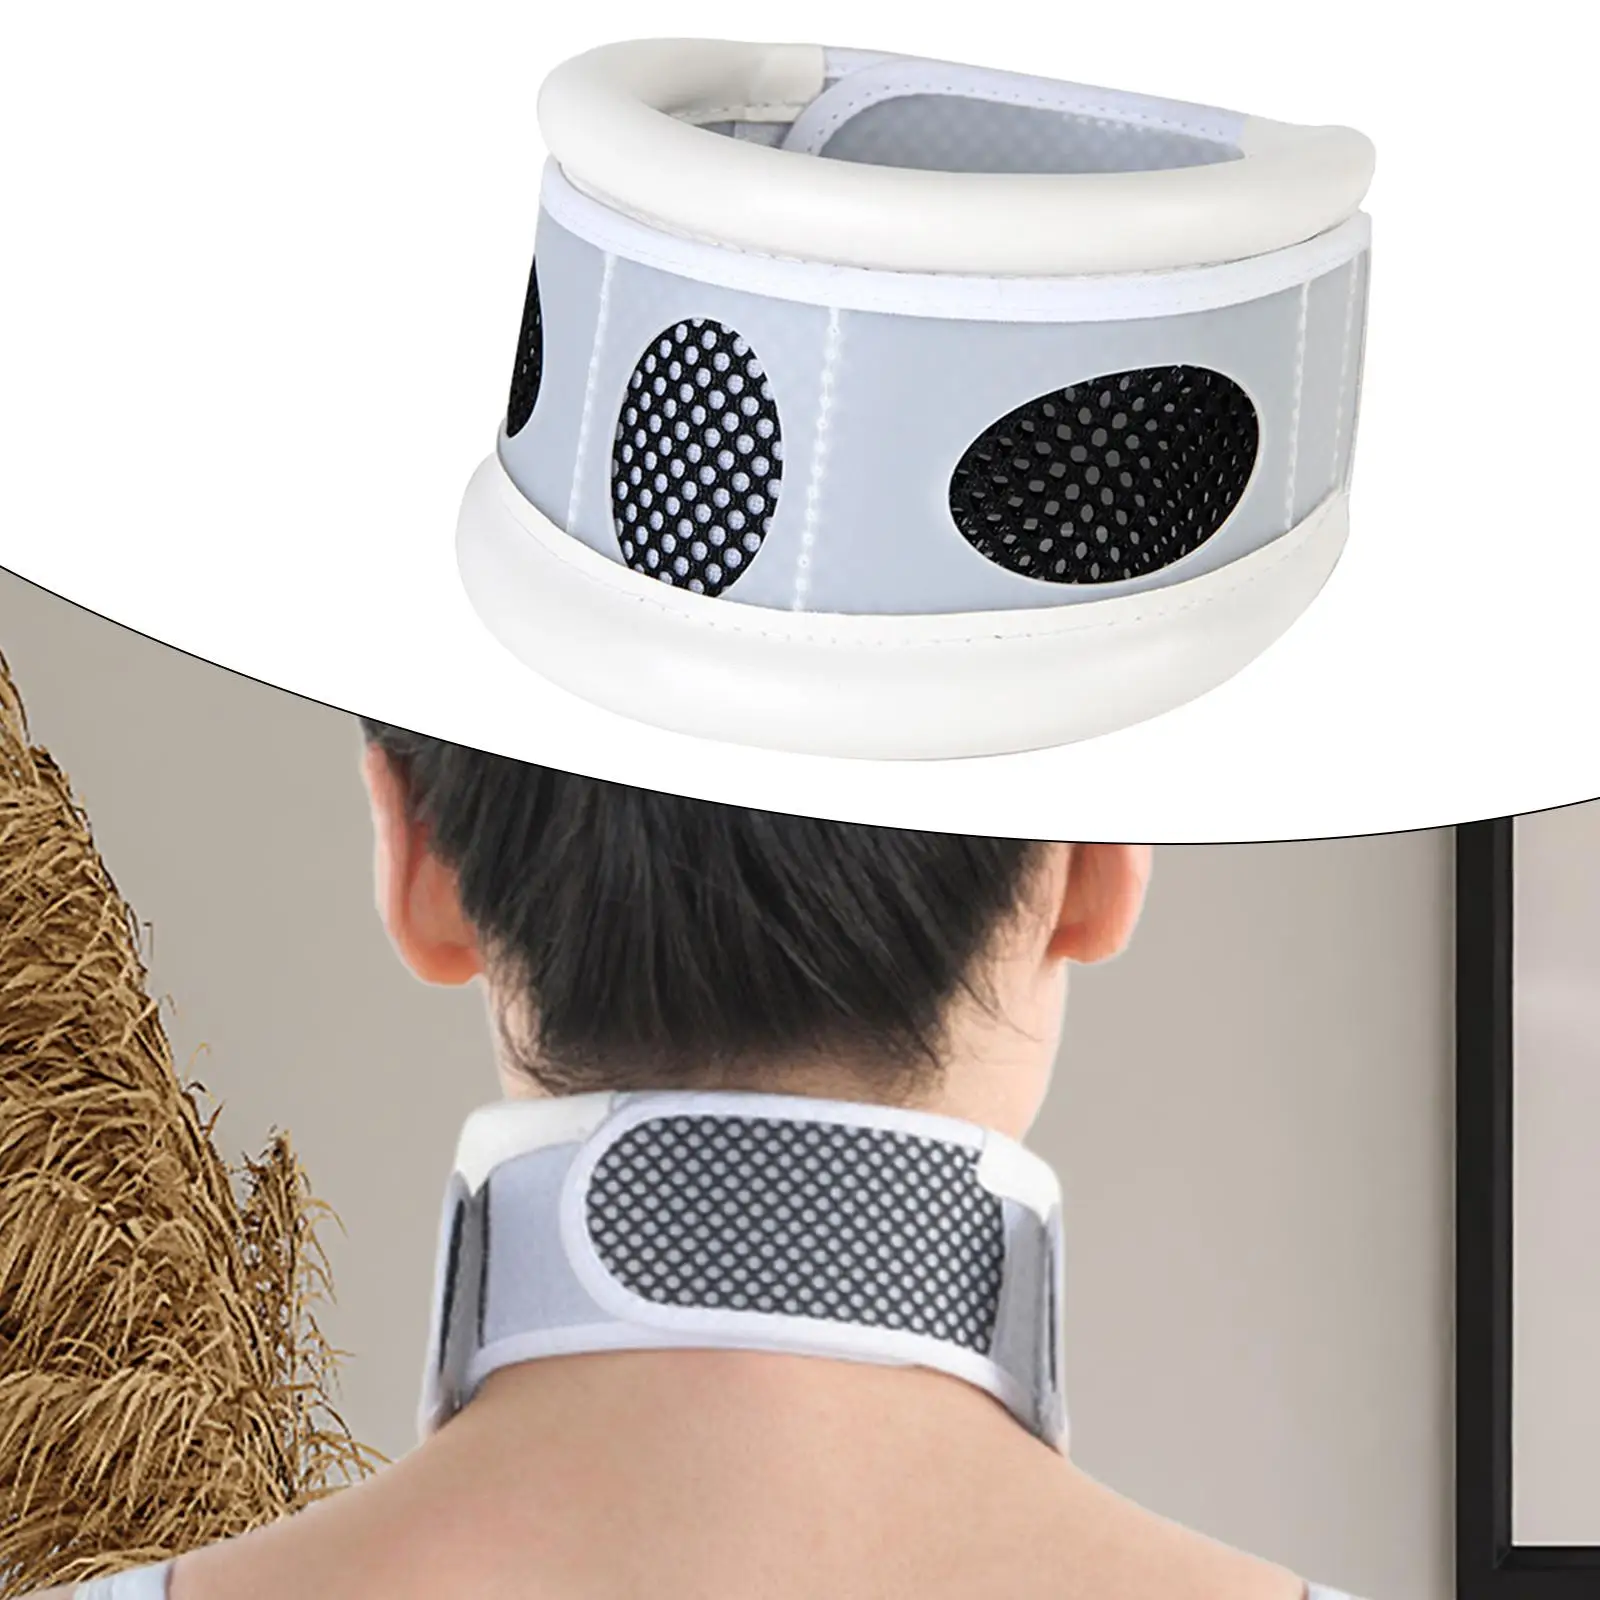 Cervical Neck Traction Device Breathable Adjustable Trusted Neck Support for Home